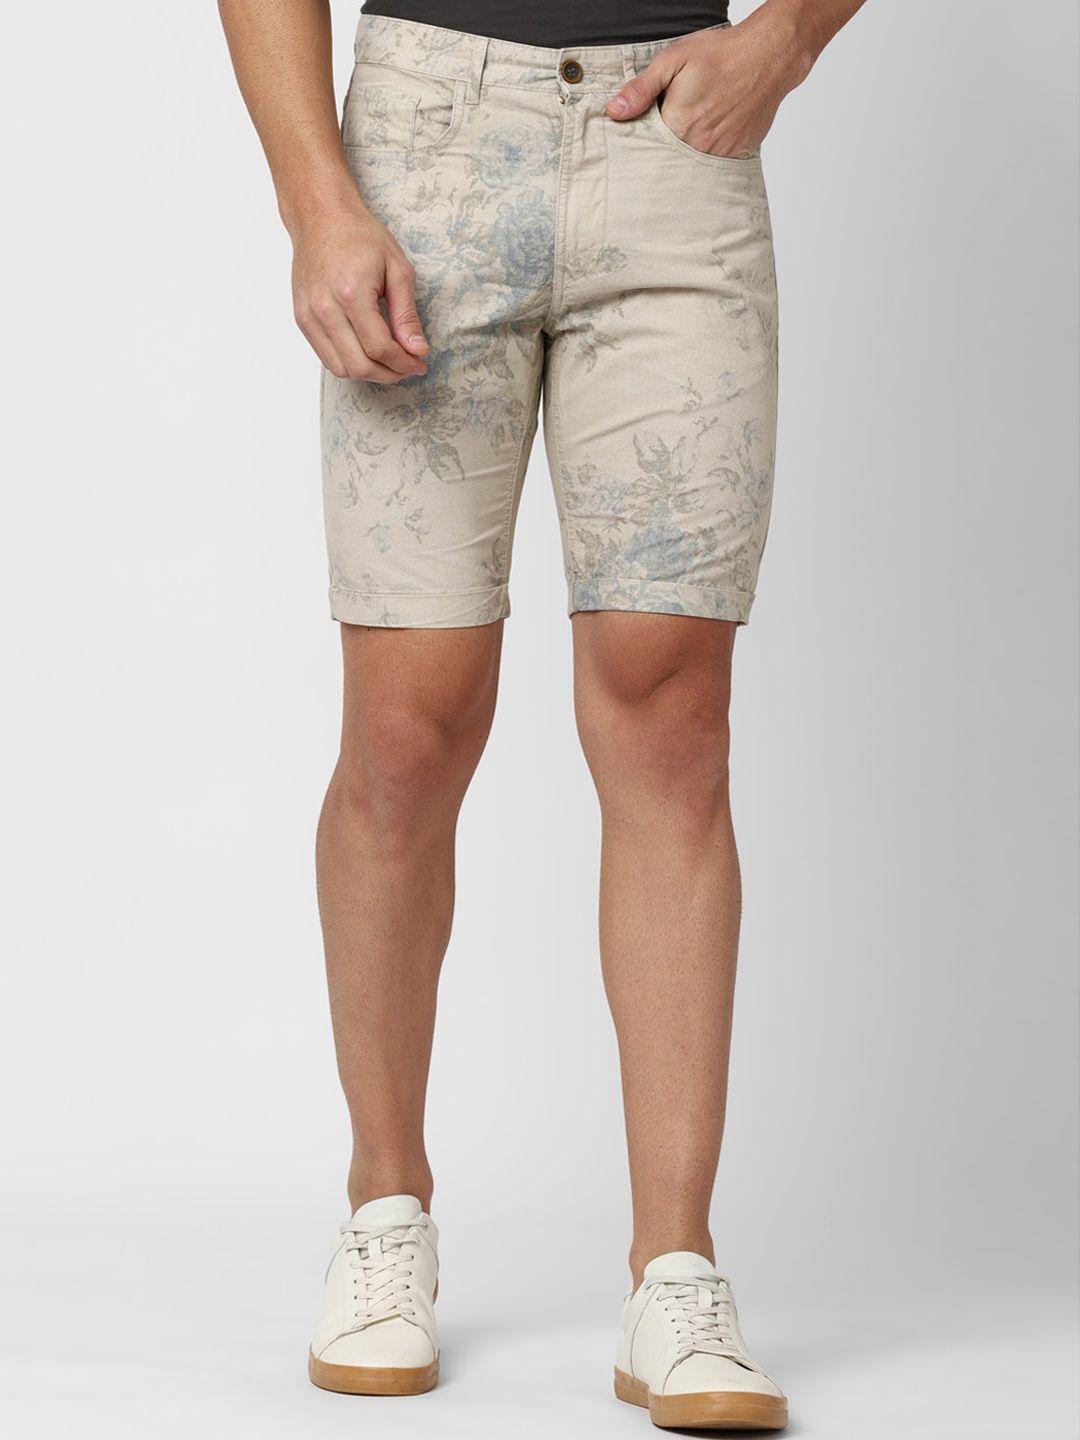 peter england casuals men beige & grey floral printed pure cotton shorts